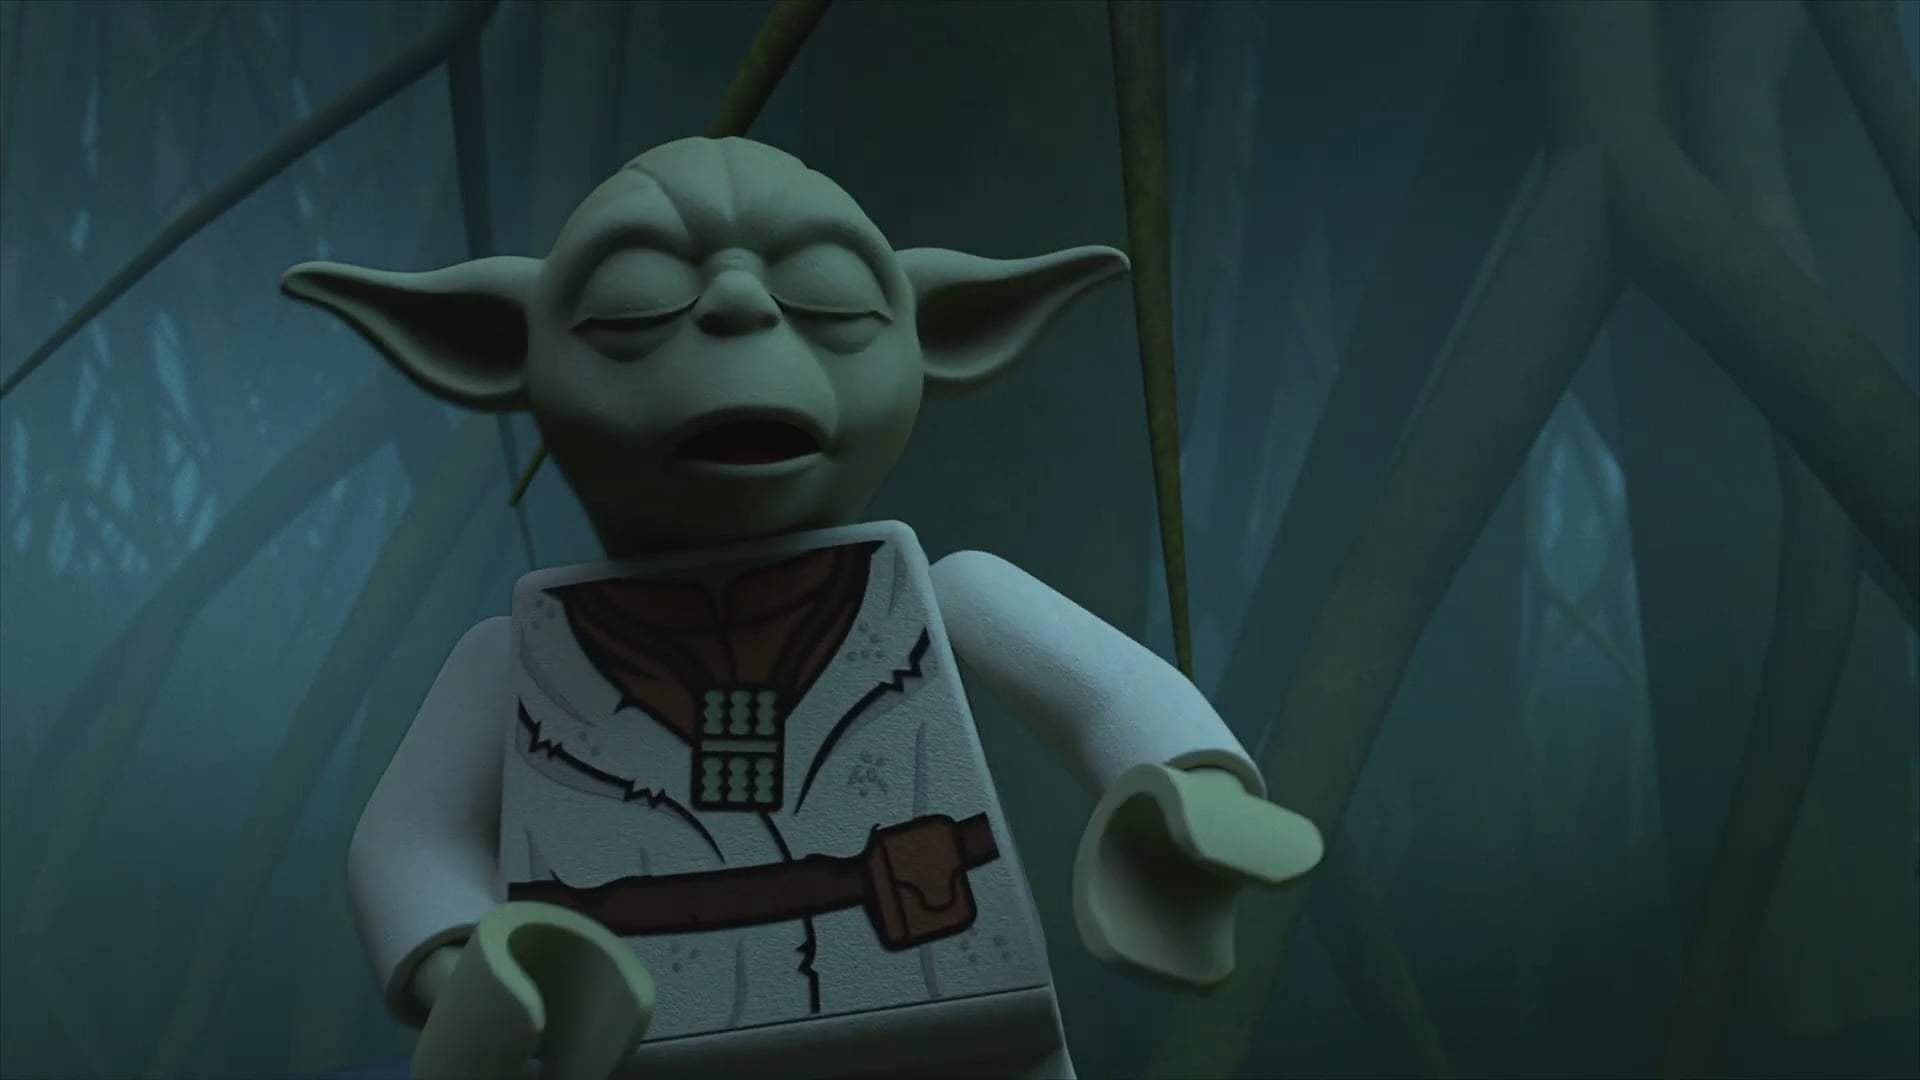 The Lego Star Wars Holiday Special Trailer (2020) Screen Capture #2